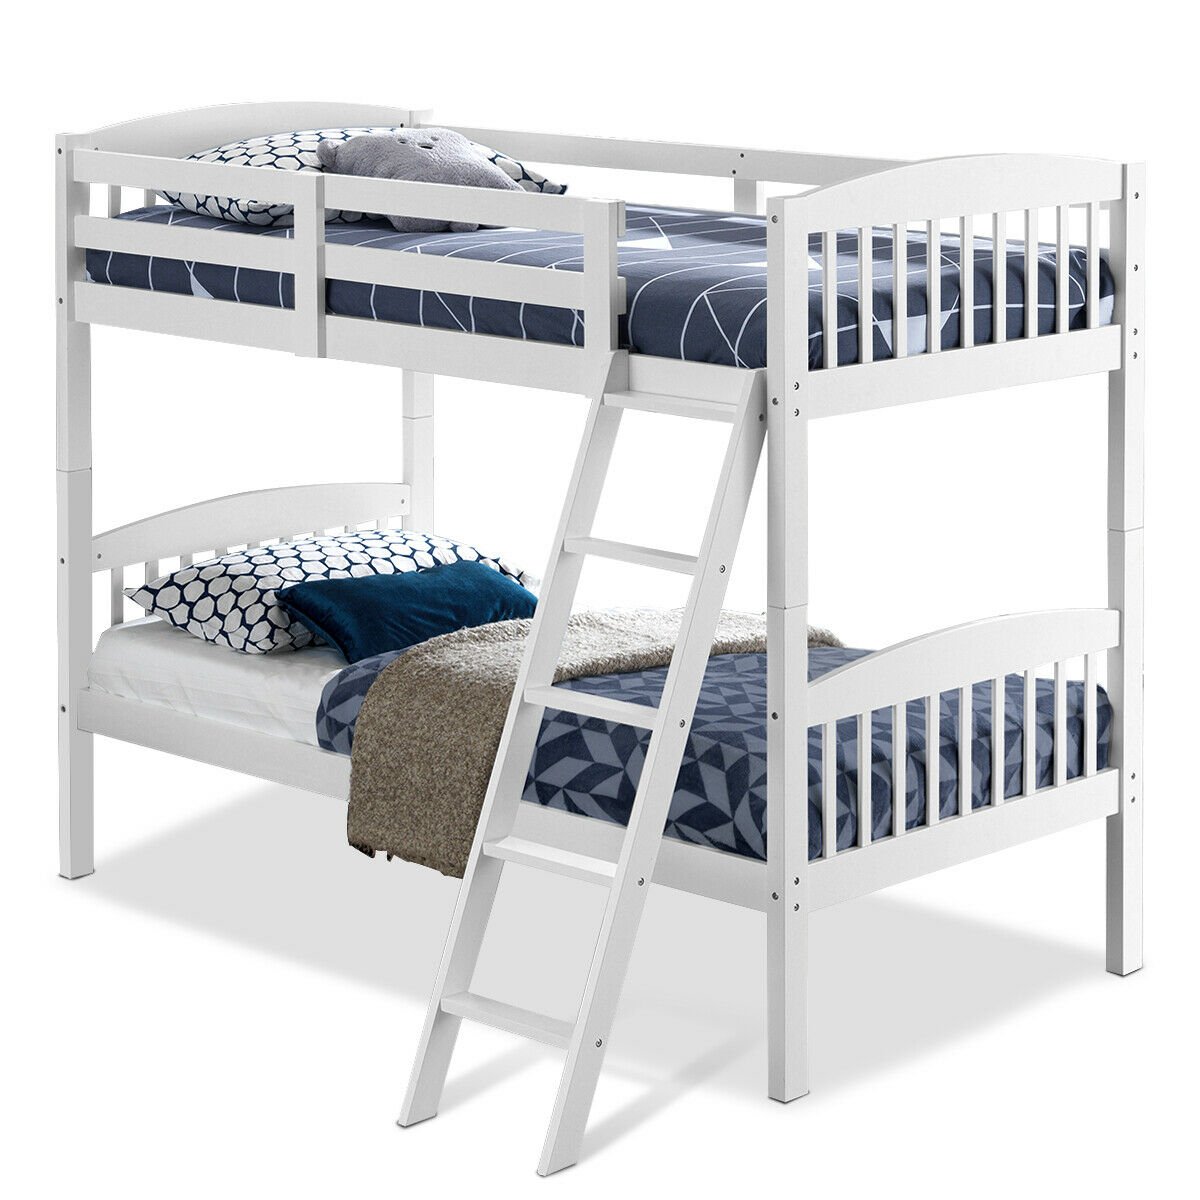 Wood Hardwood Twin Bunk Beds Convertible Into 2 Individual Kid Bed Ladder White